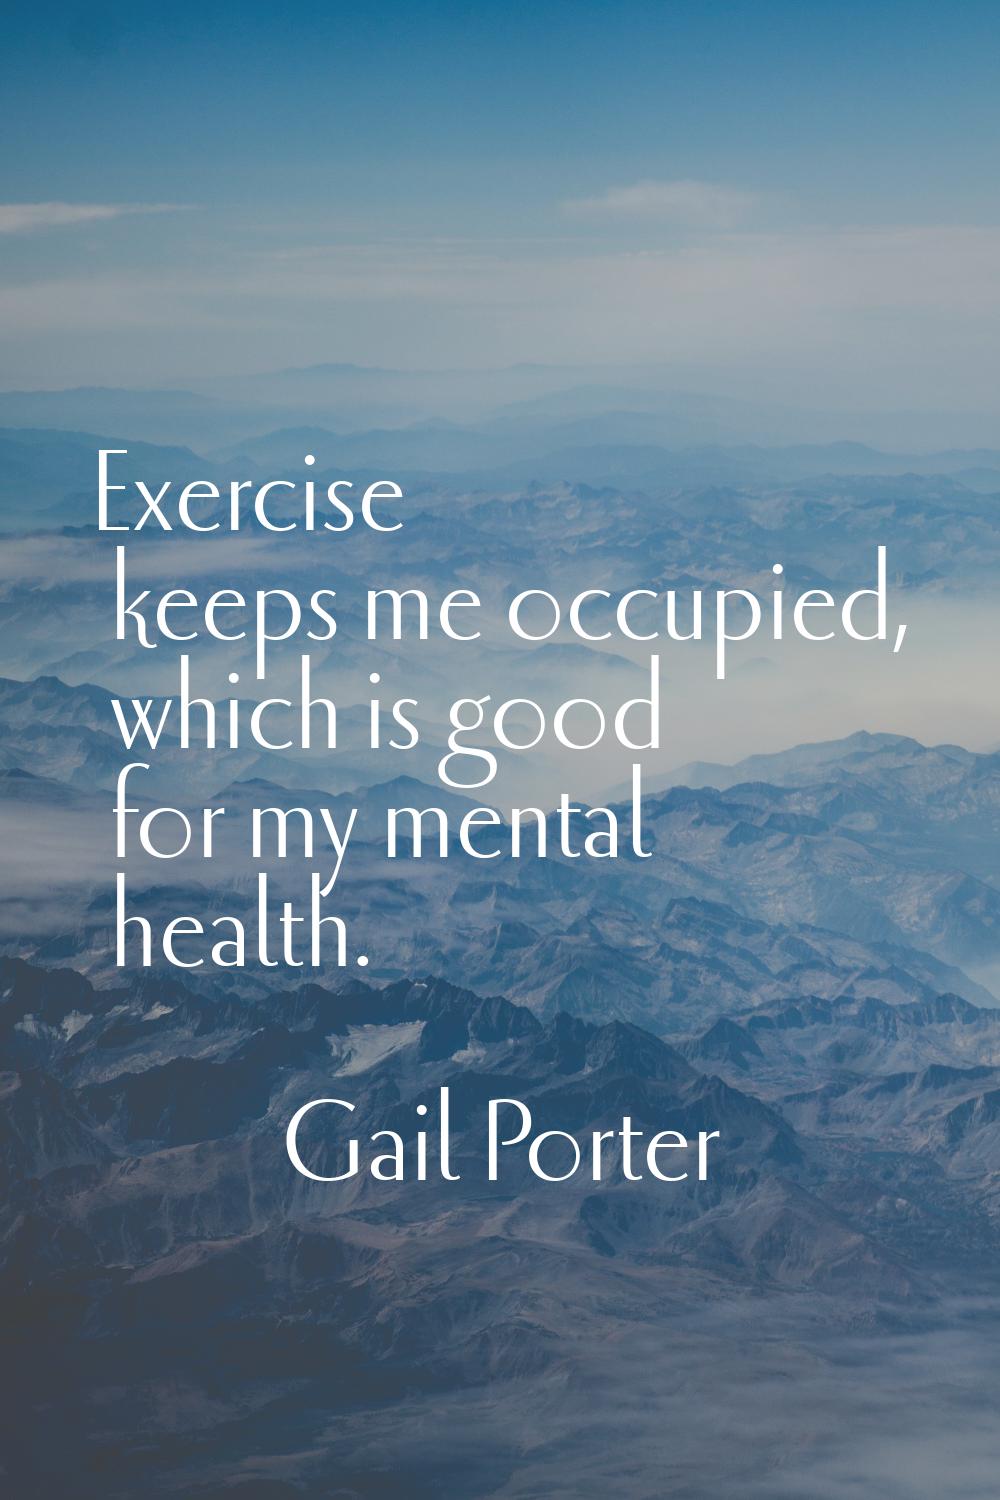 Exercise keeps me occupied, which is good for my mental health.